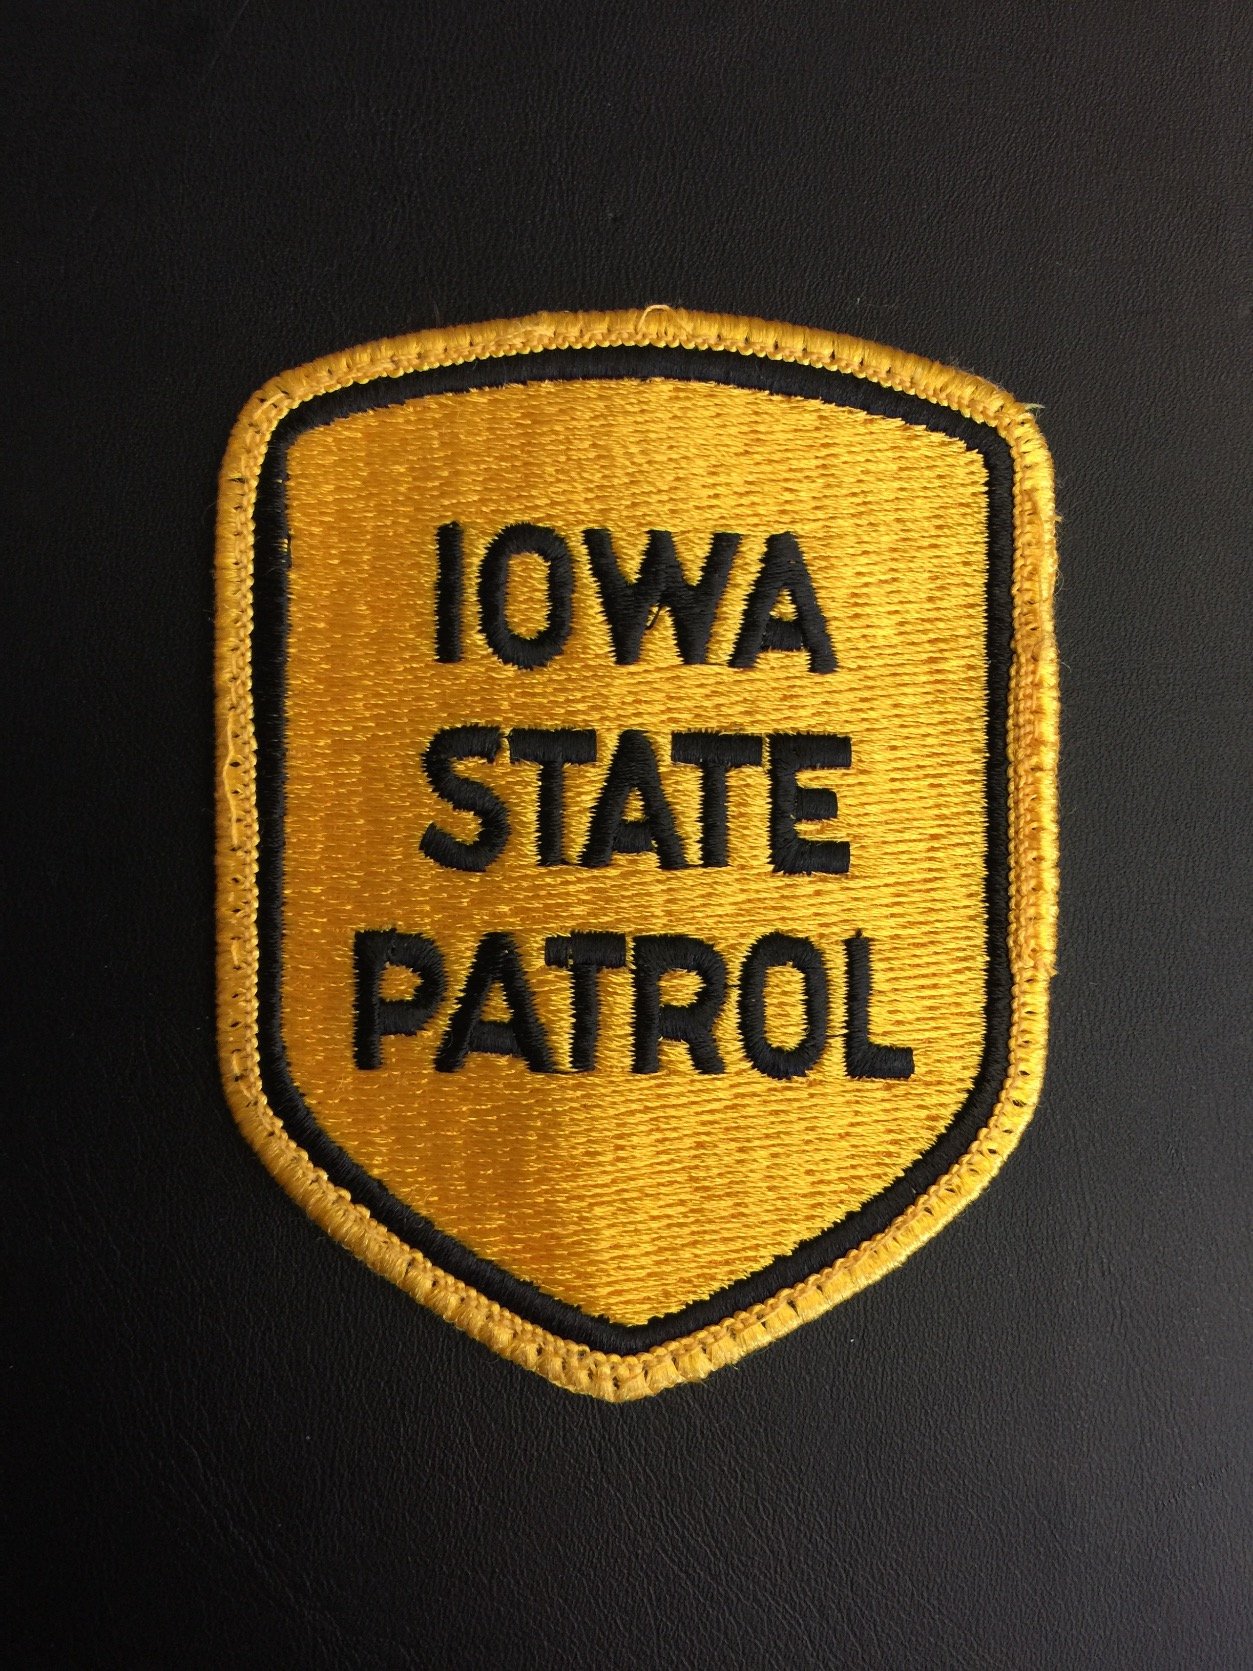 Proudly serve the men and women of the Iowa State Patrol as their Chief.